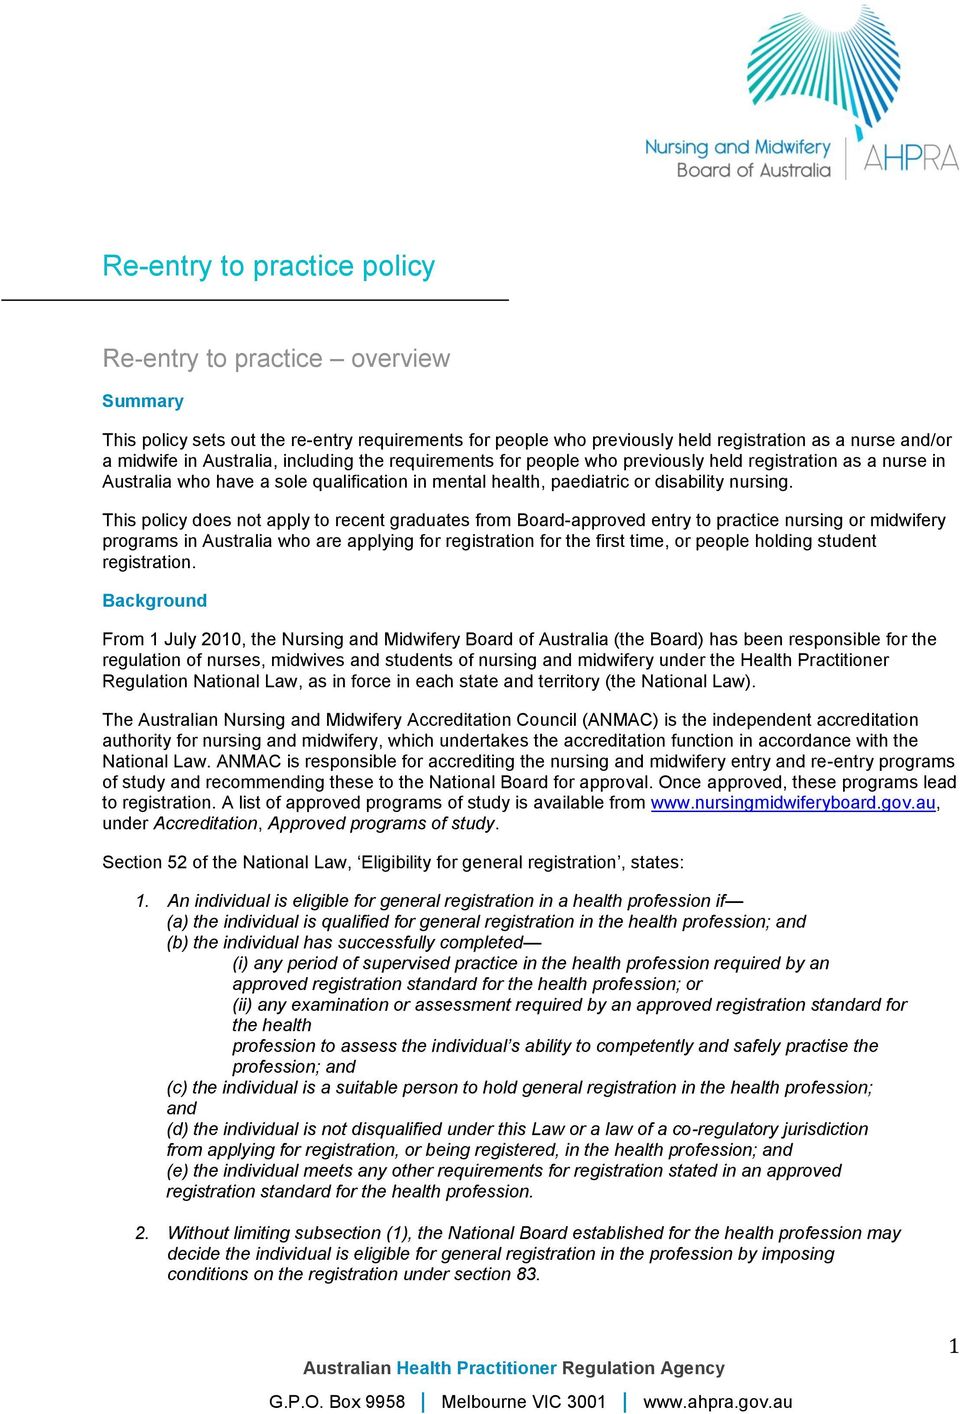 This policy does not apply to recent graduates from Board-approved entry to practice nursing or midwifery programs in Australia who are applying for registration for the first time, or people holding